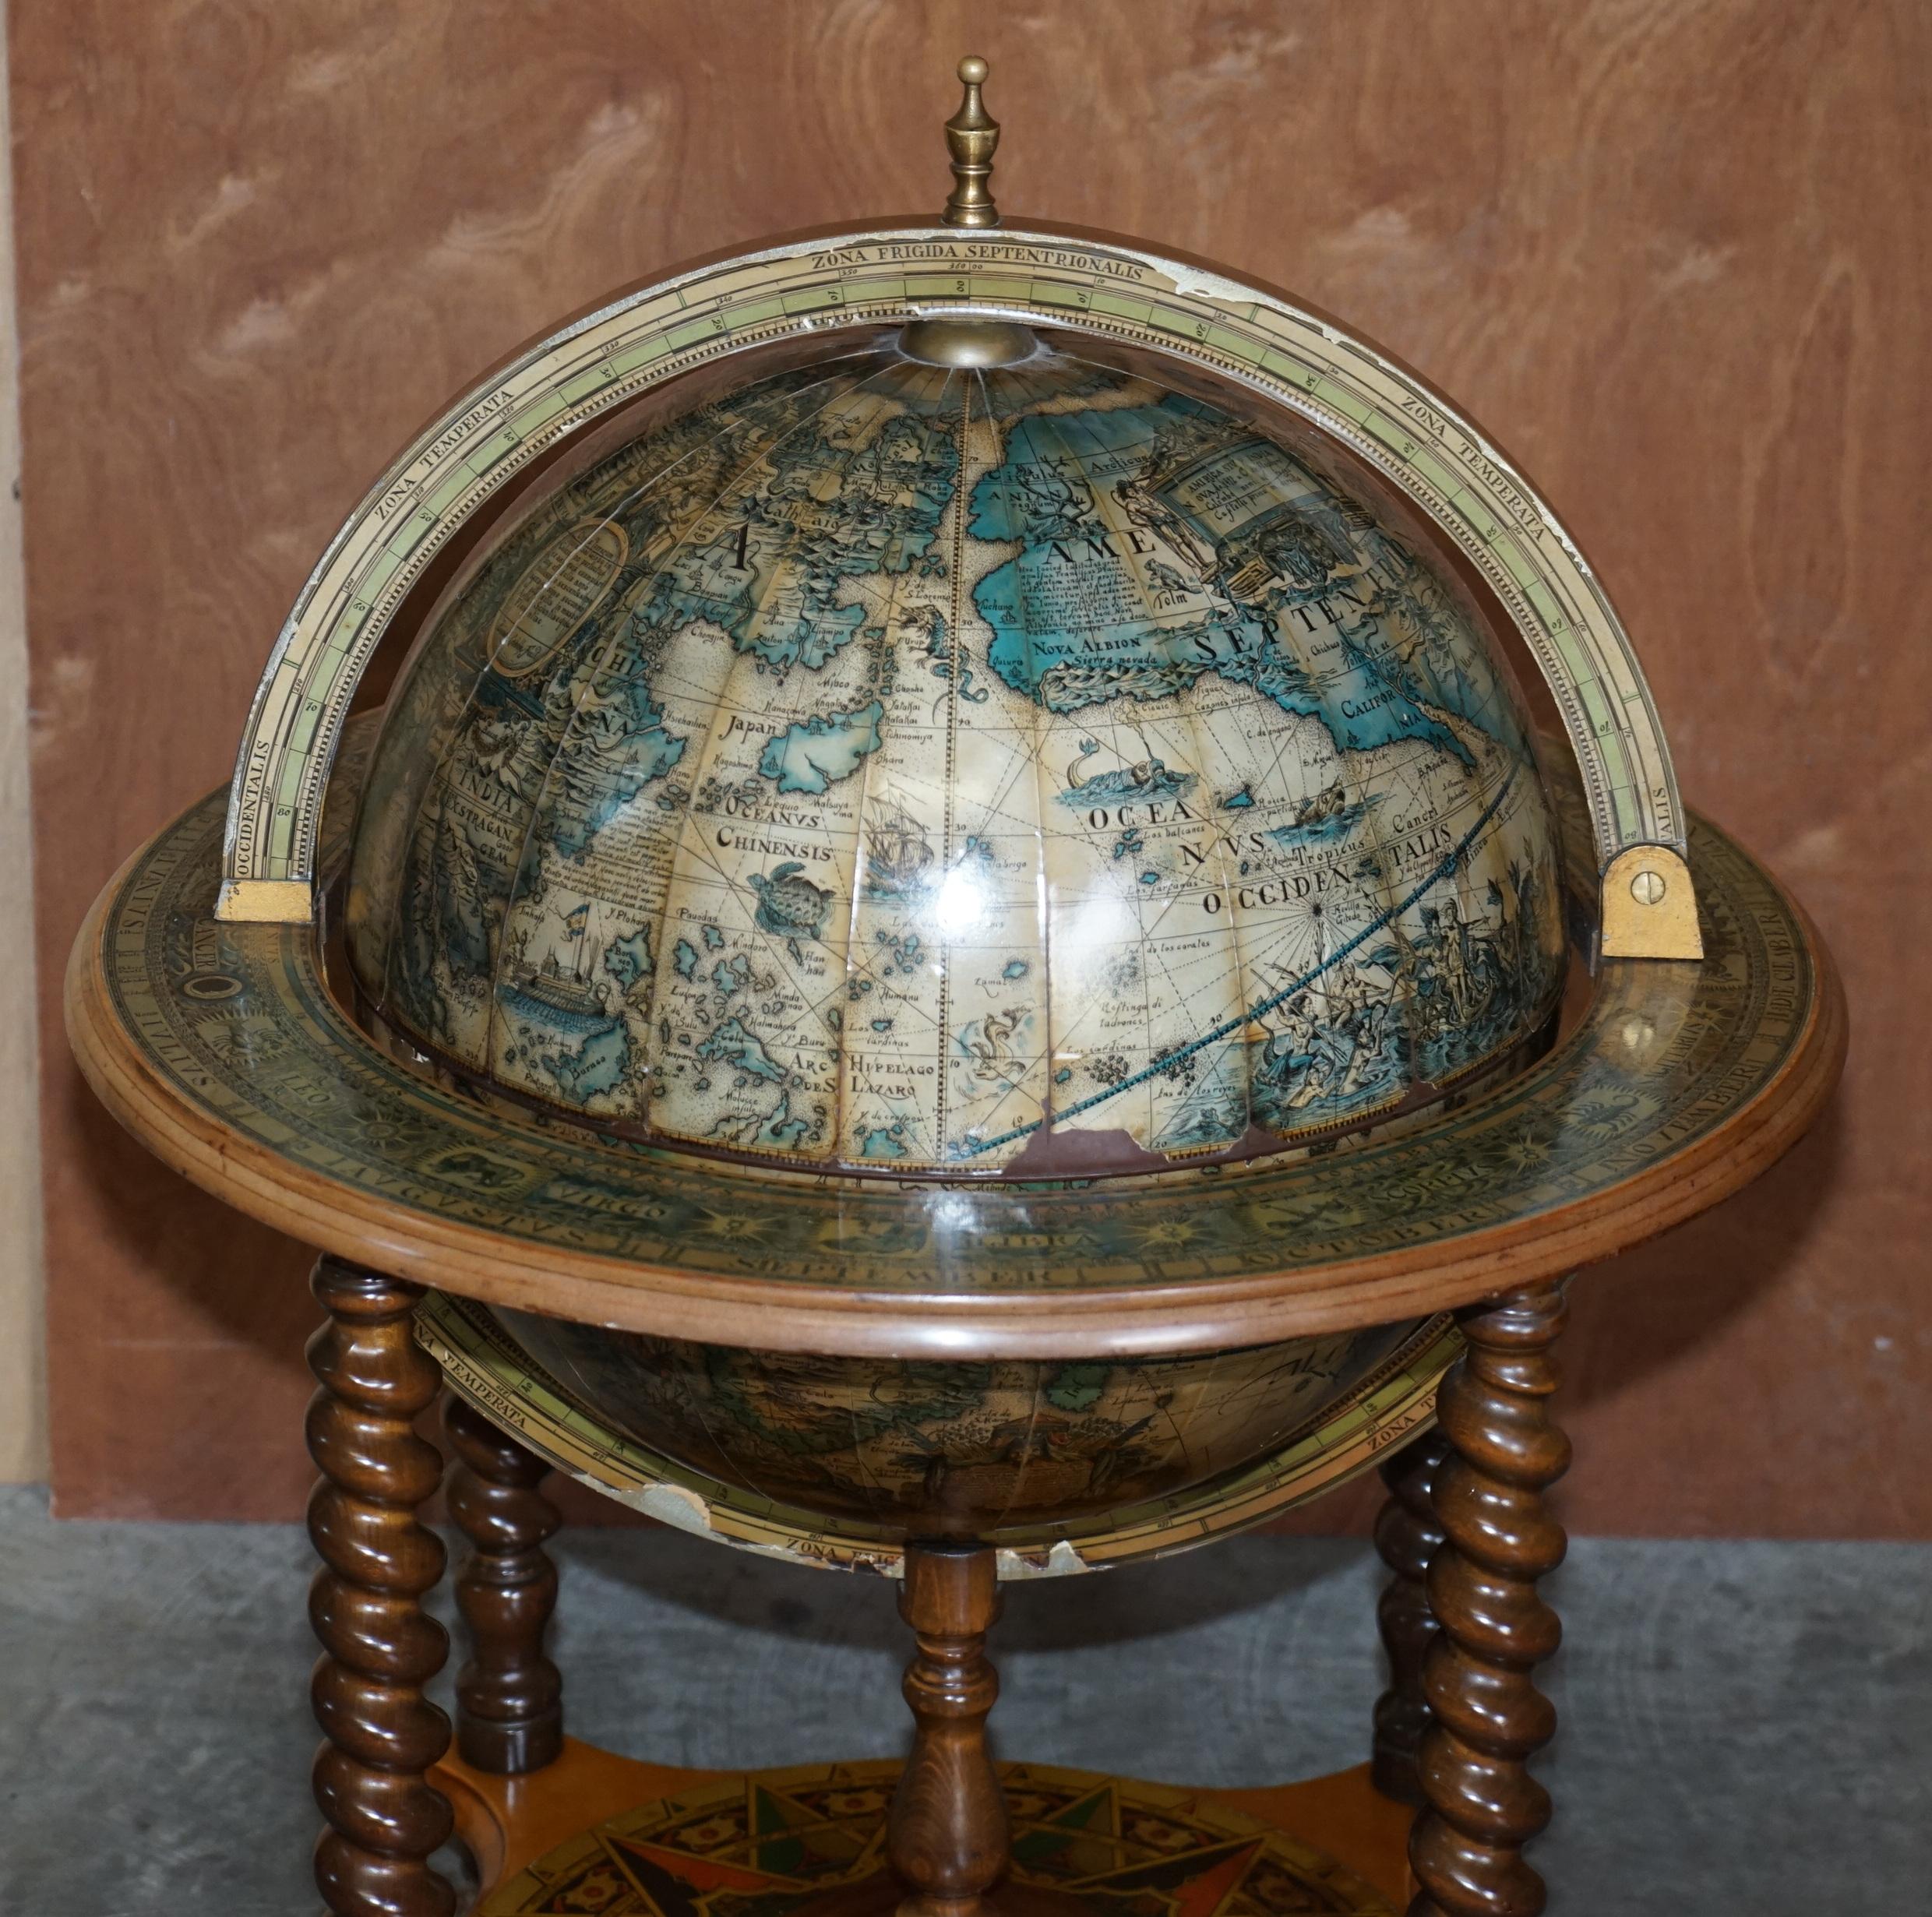 We are delighted to offer for sale this nice decorative vintage floor standing globe drinks cabinet table with 19.5 inch globe

A good looking, well made and decorative piece, the top opens up to reveal a drinks cabinet with original ice bucket